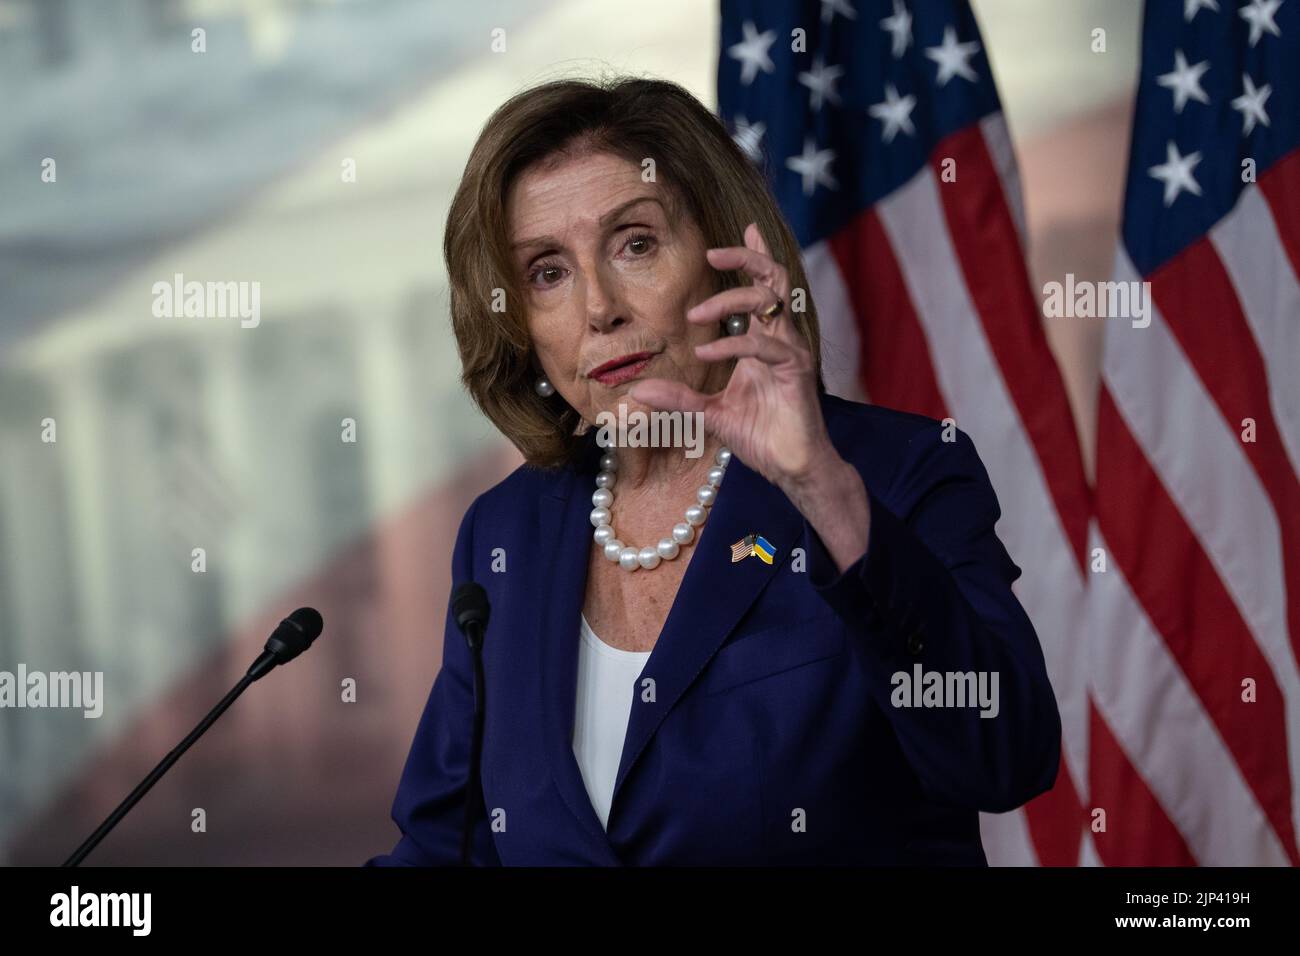 Washington, United States Of America. 29th July, 2022. Speaker of the United States House of Representatives Nancy Pelosi (Democrat of California) holds a news conference on Capitol Hill in Washington, DC, Friday, July 29, 2022. Credit: Chris Kleponis/CNP/AdMedia/Newscom/Alamy Live News Stock Photo